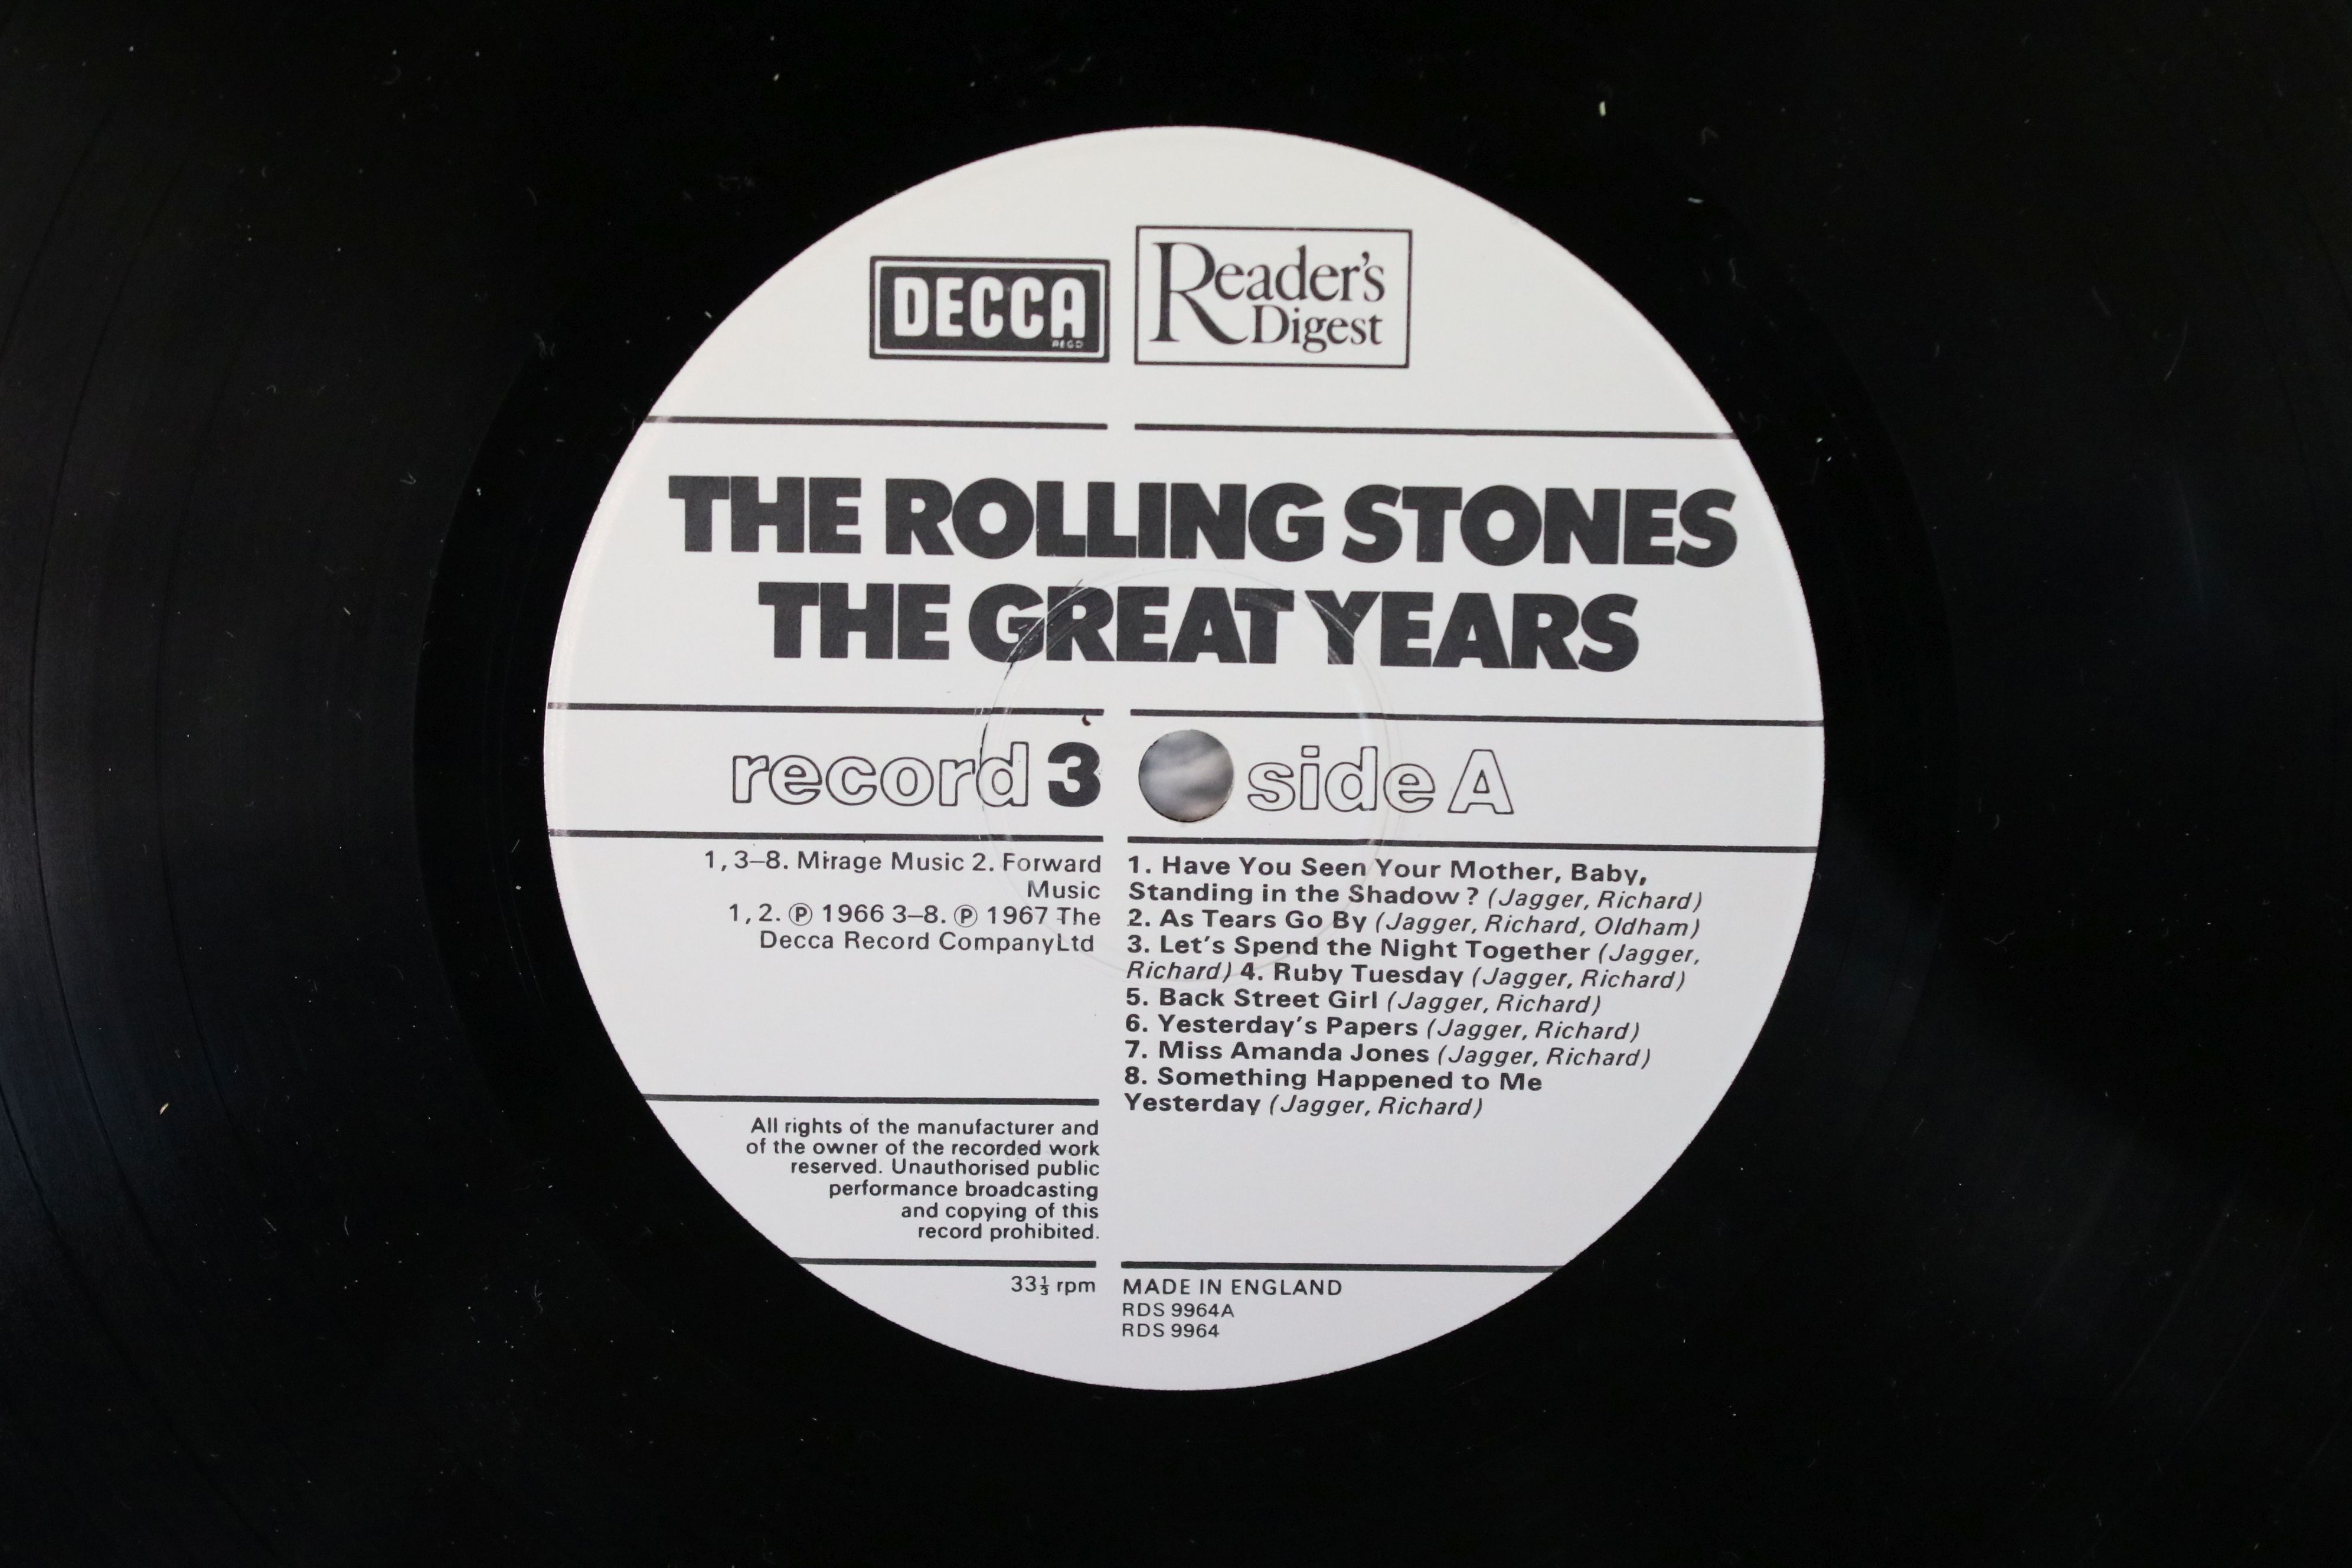 Vinyl - The Rolling Stones The Great Years Box Set on Readers Digest / Decca 4 LP Box Set, box, - Image 3 of 11